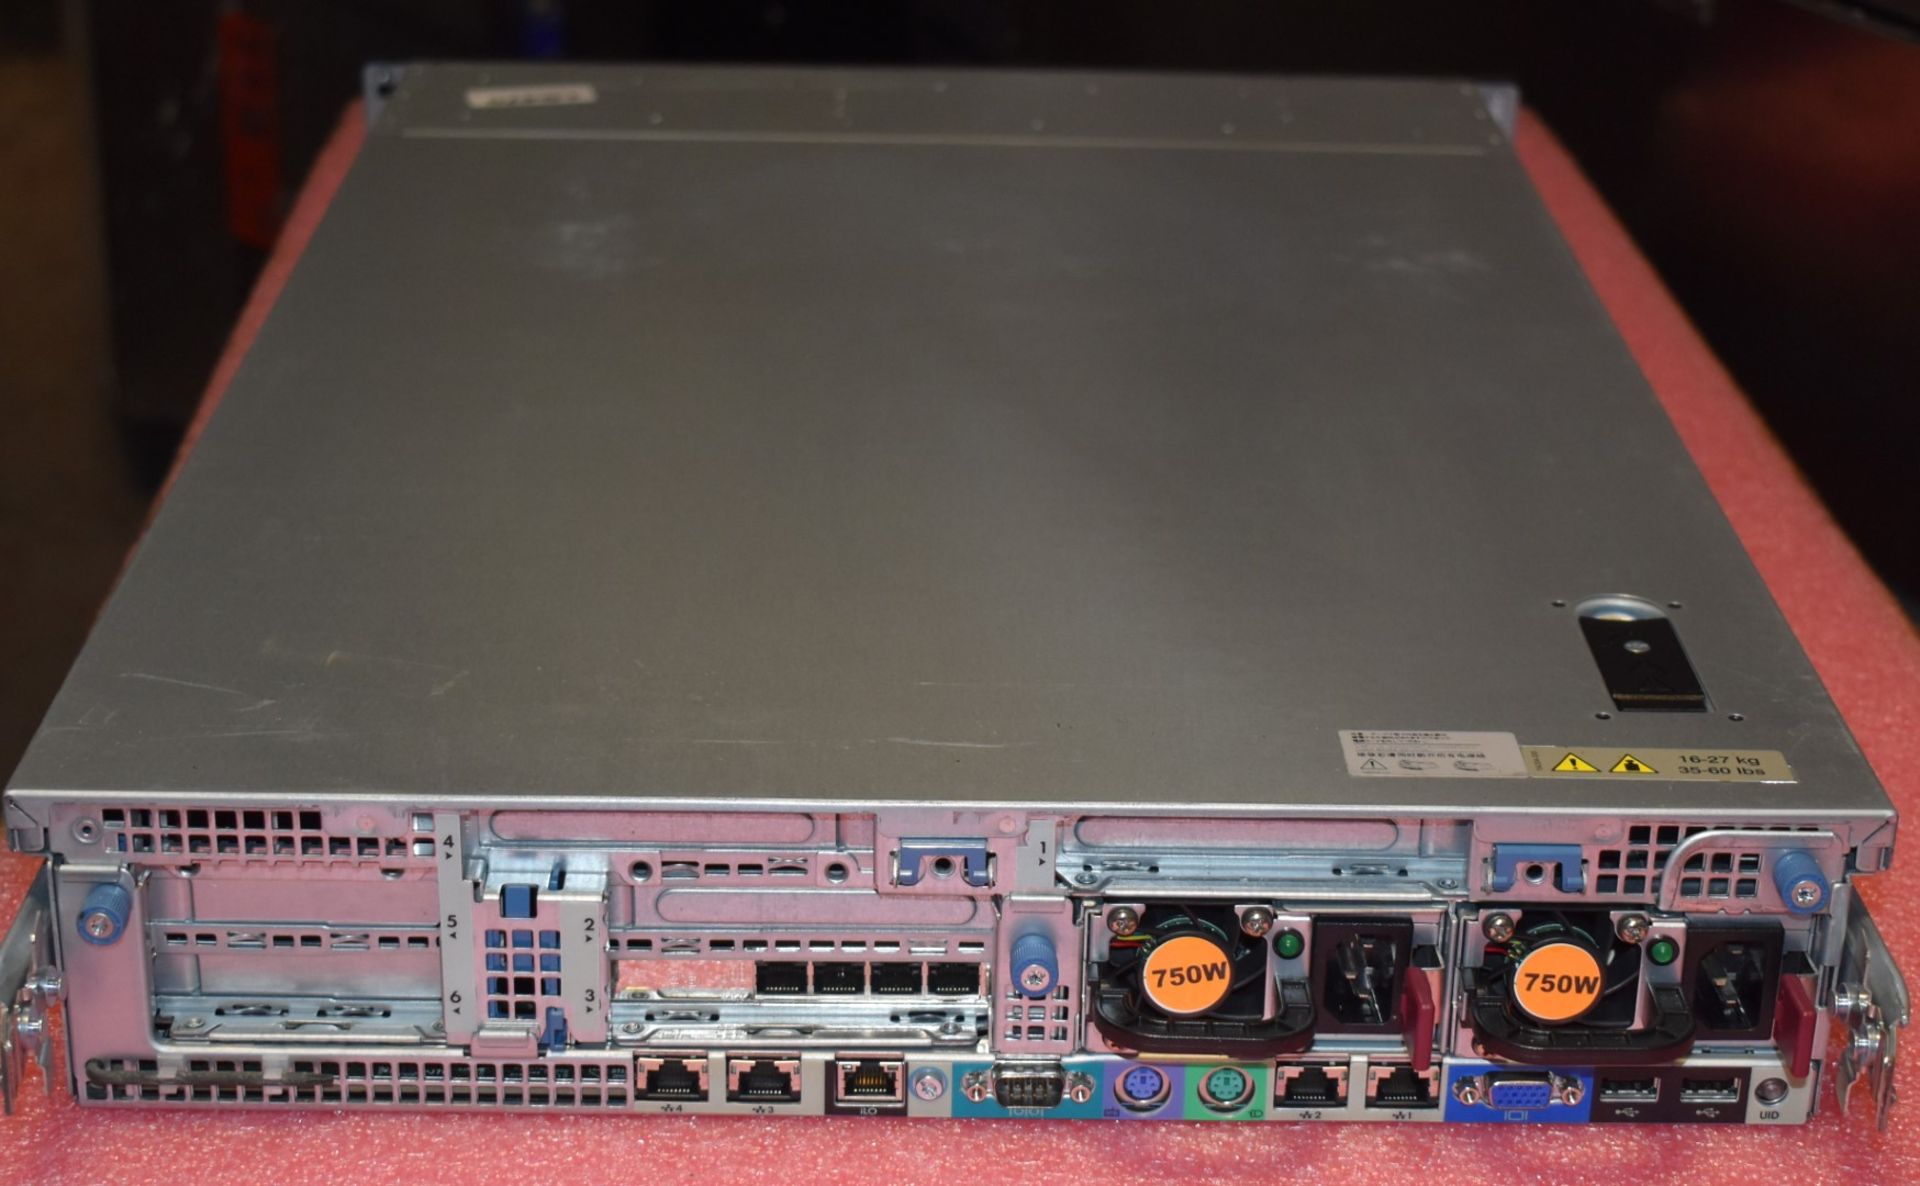 1 x HP ProLiant DL380 G7 Server With 2 x Intel Xeon X5650 Six Core 3.06ghz Processors and 84gb Ram - - Image 7 of 7